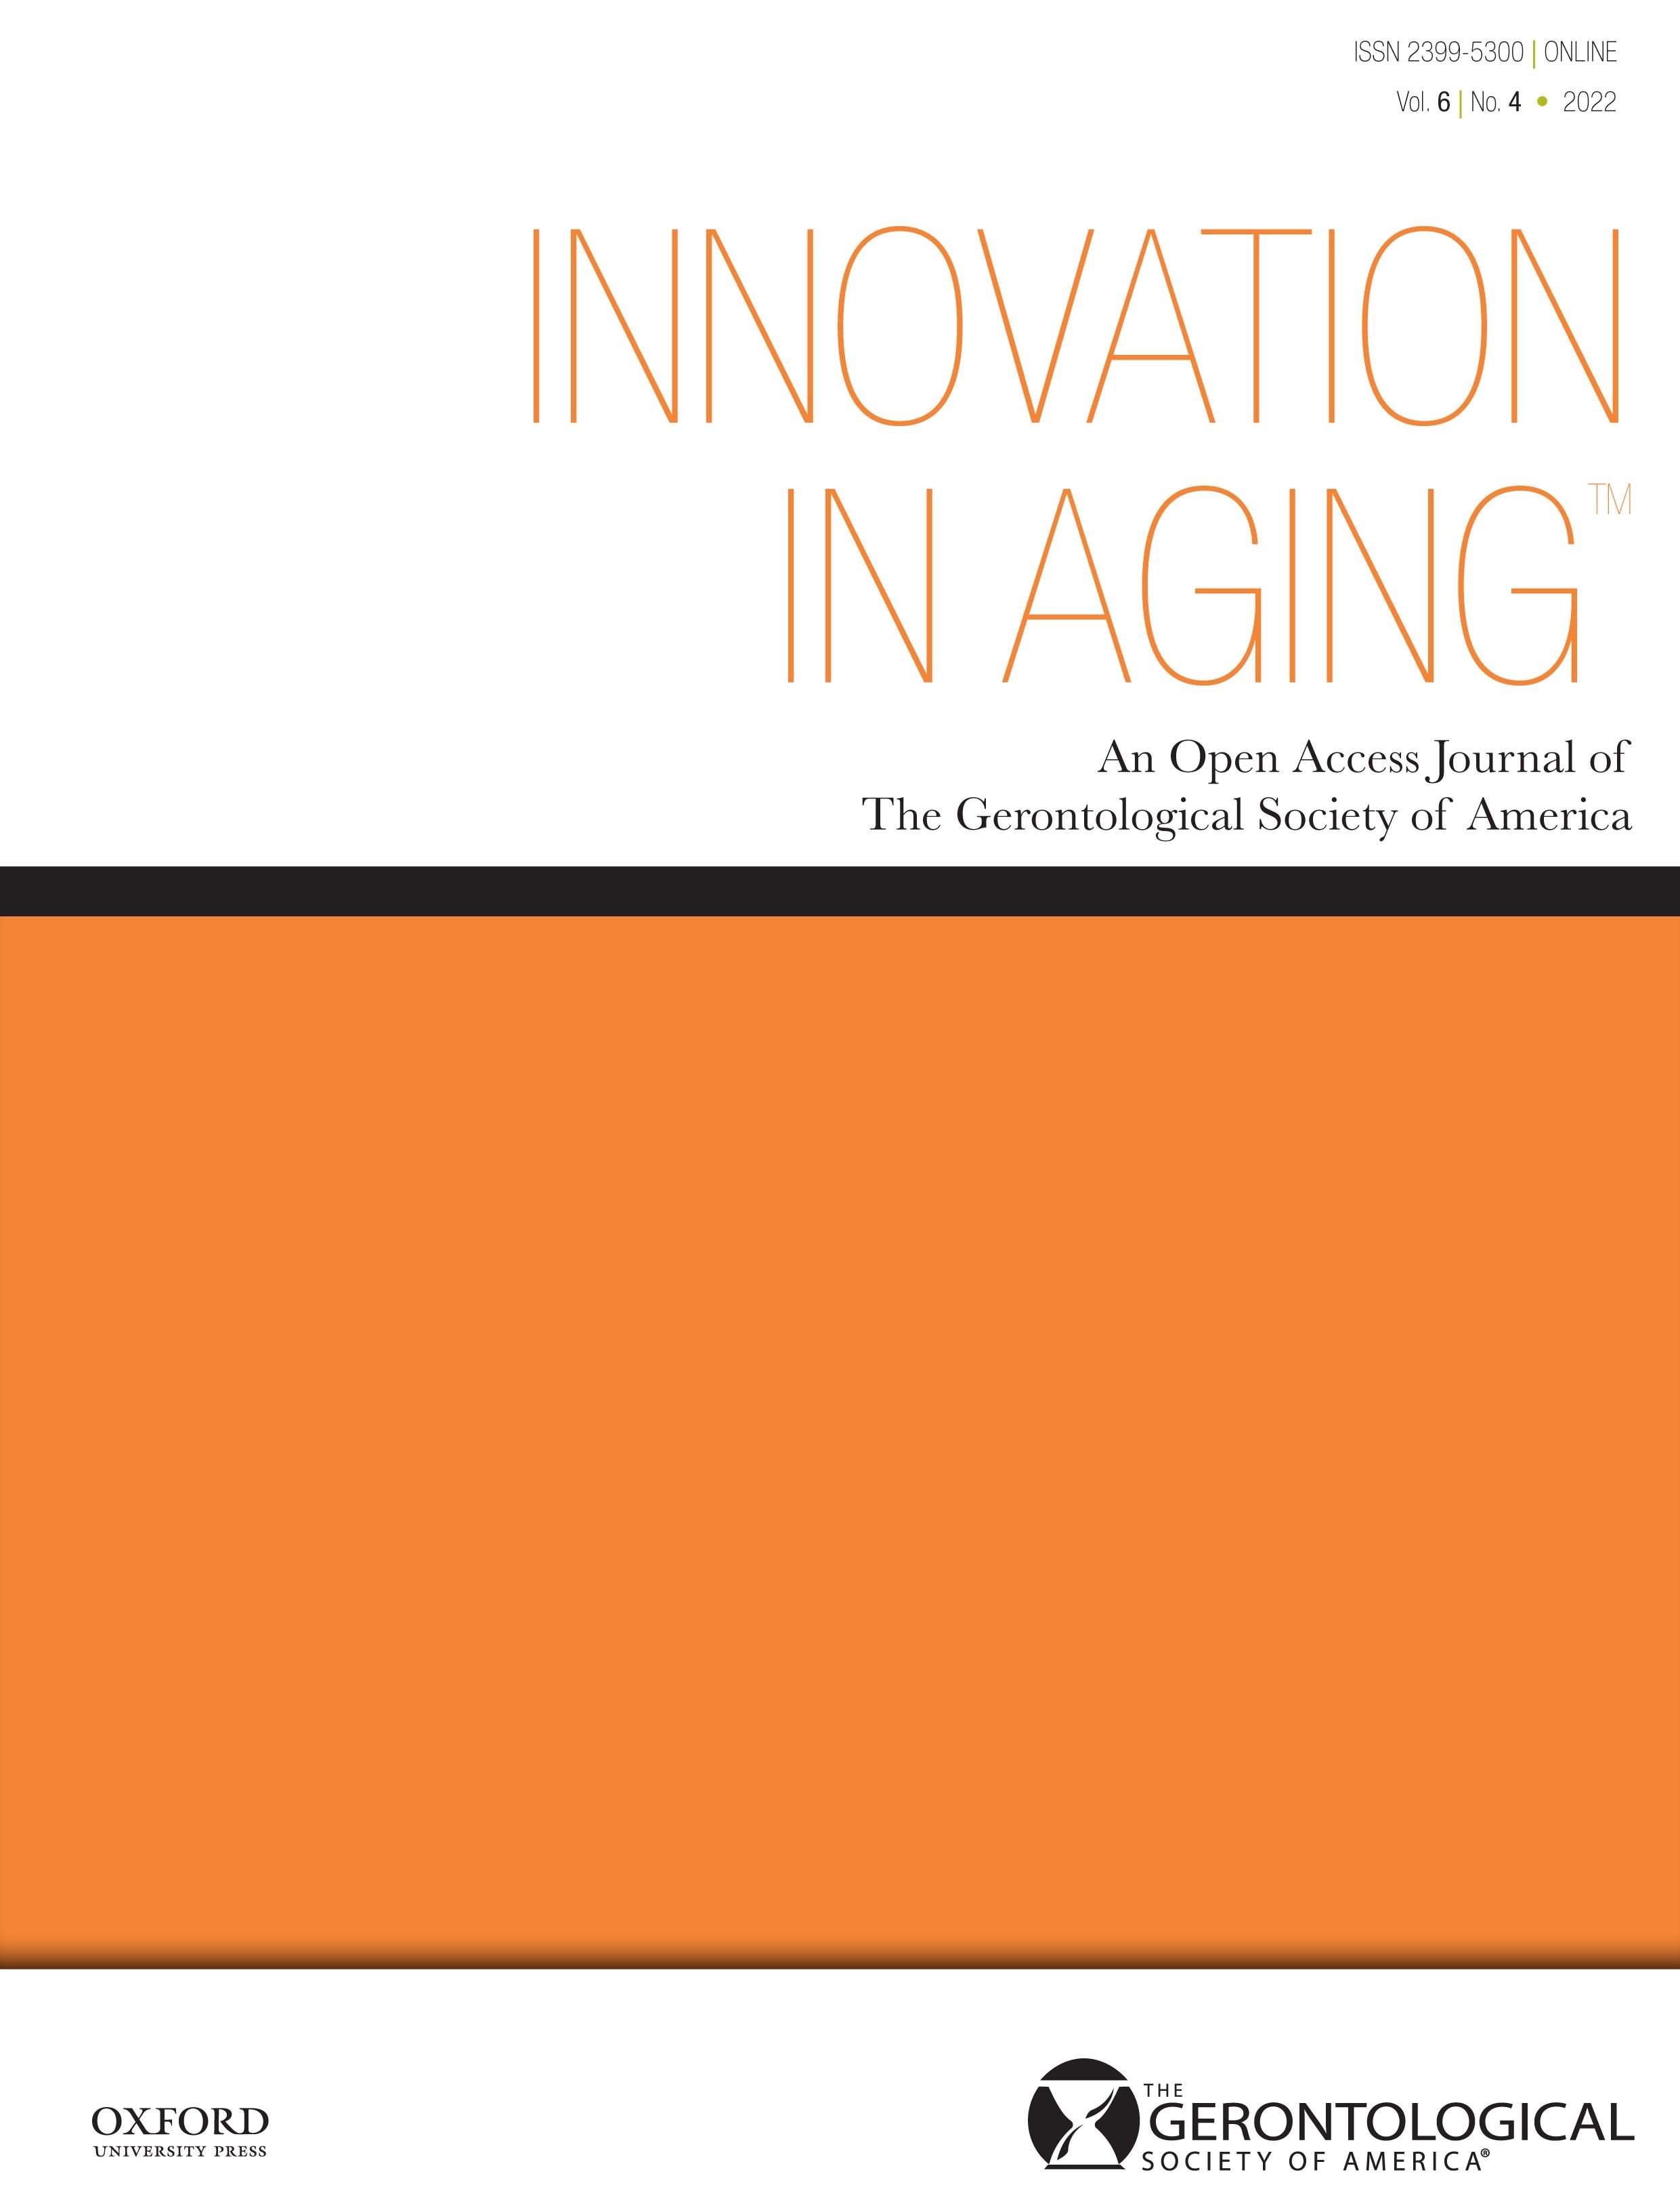 Cover of the Innovation in Aging Journal, which includes "Evidence to Inform Policy and Practice: Mechanisms to Address Racial/Ethnic Disparities in Nursing Home Quality of Life".